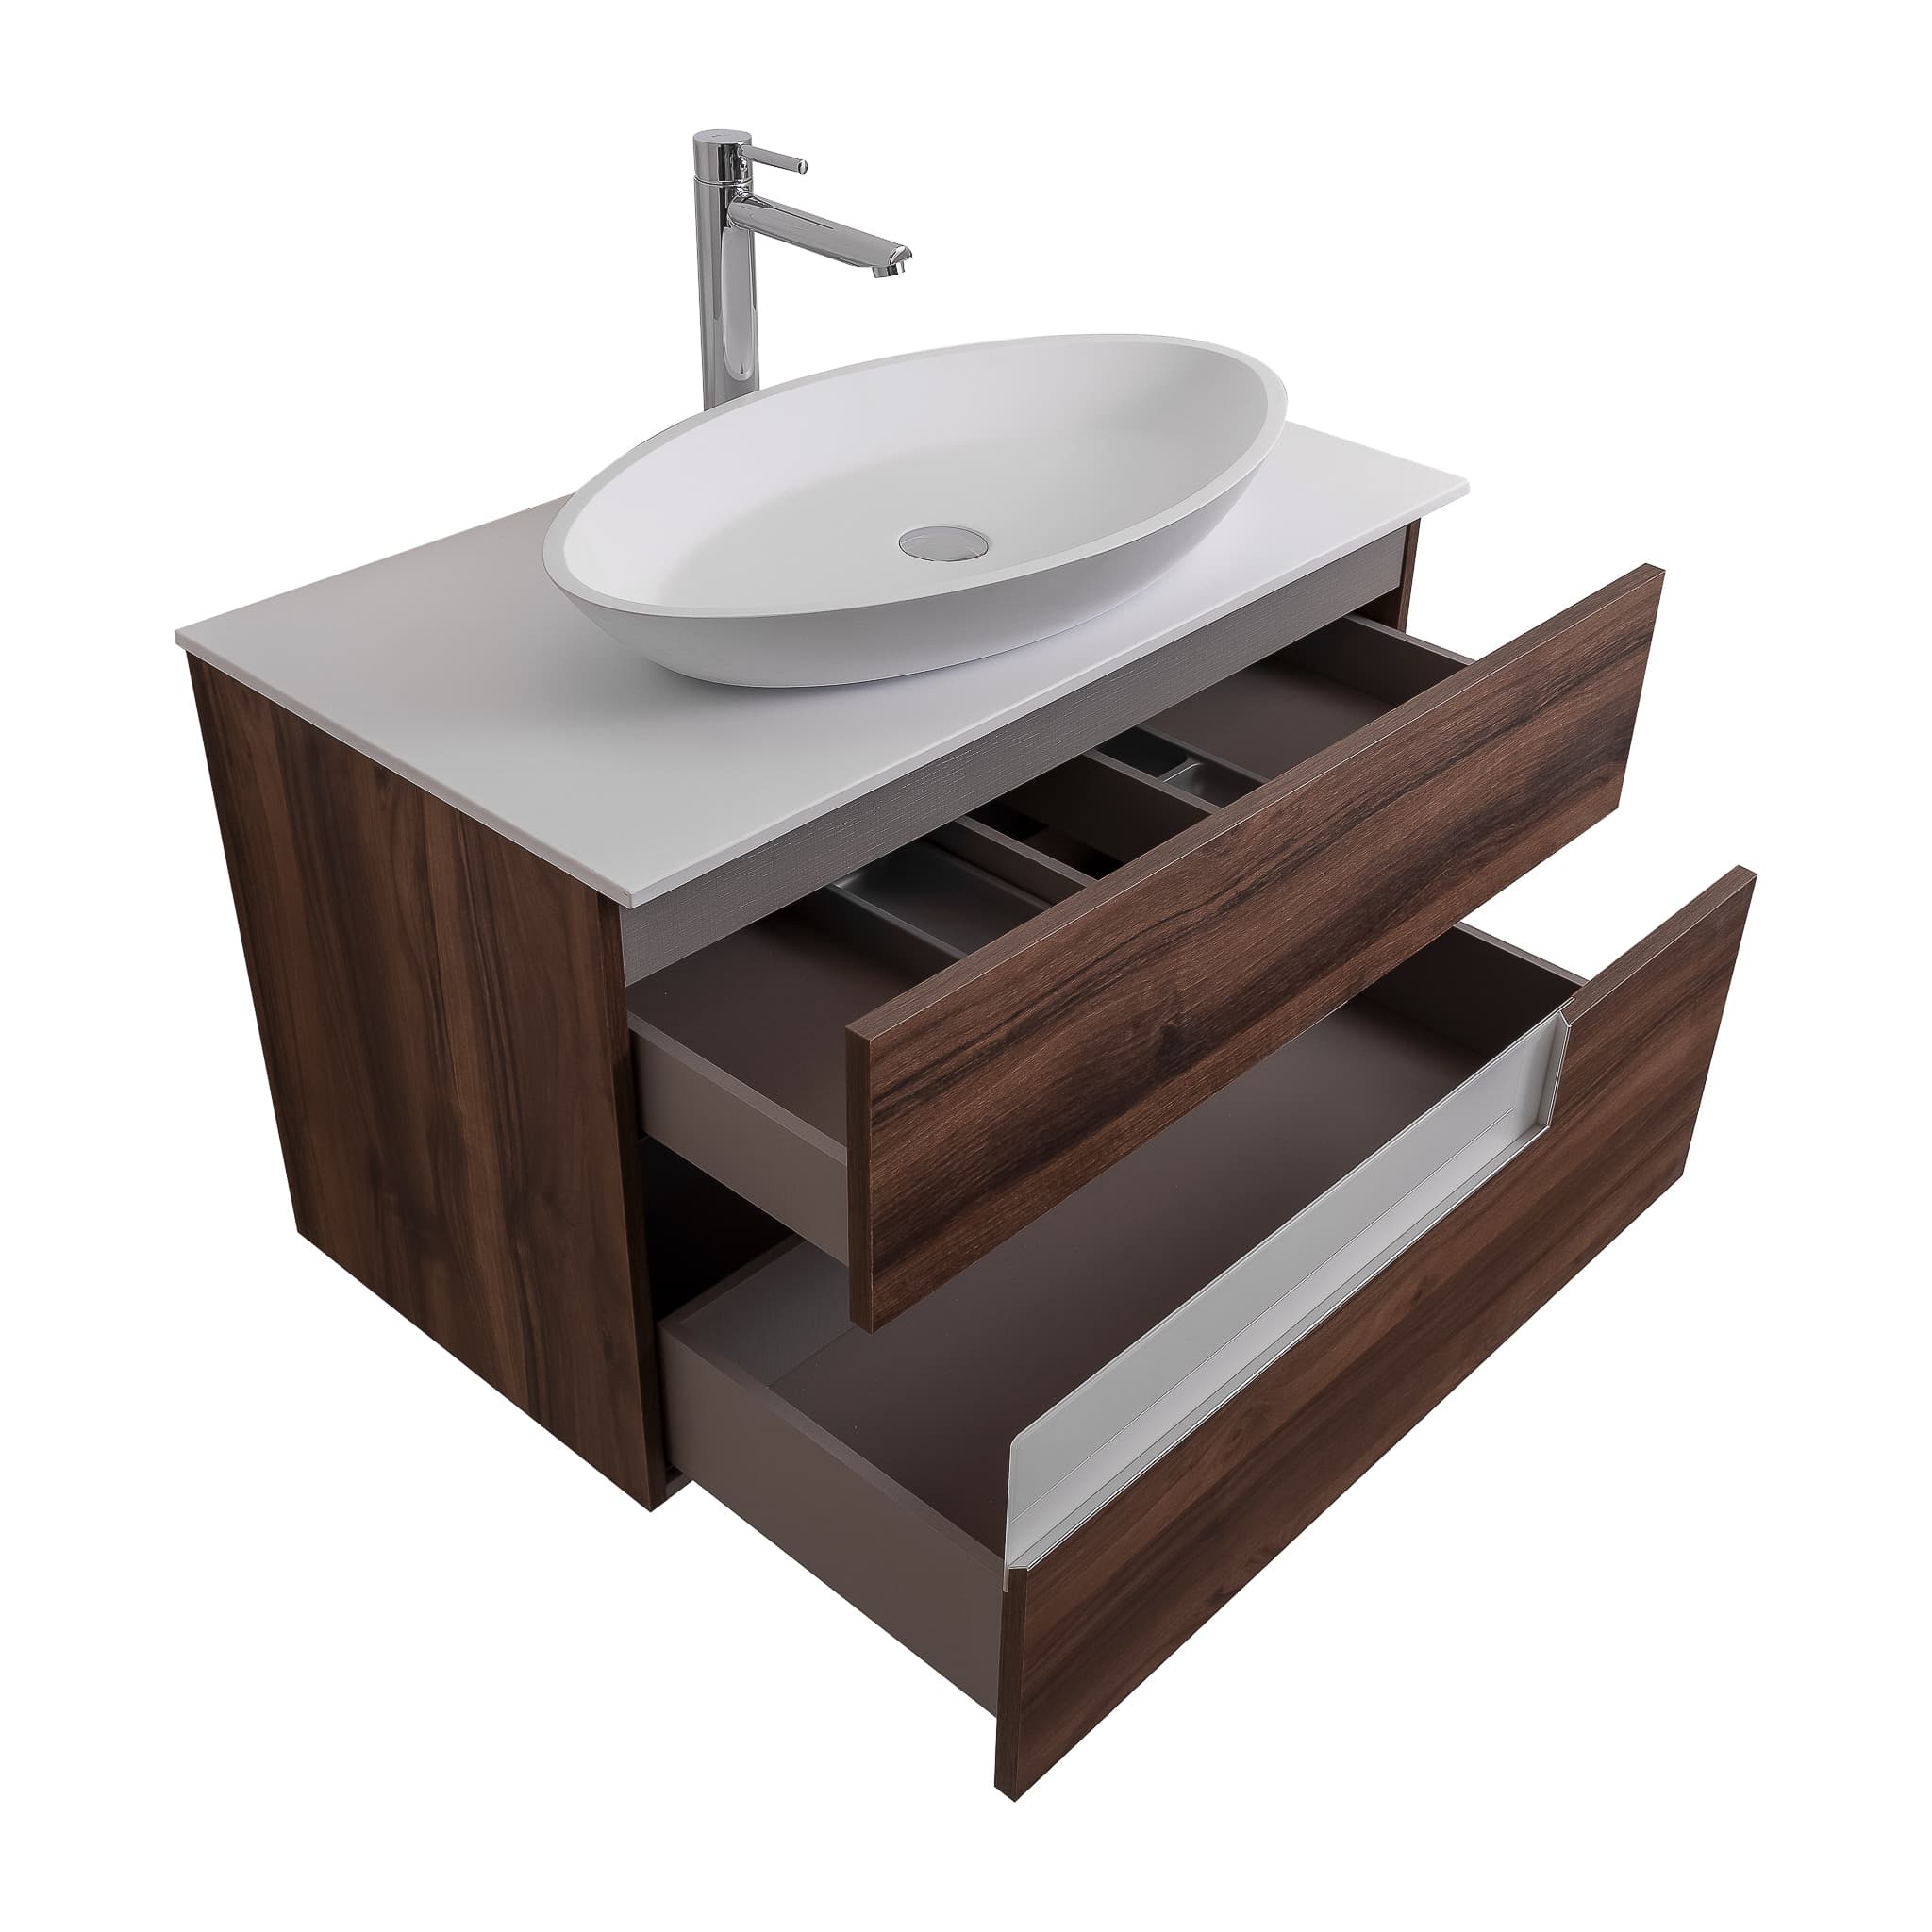 Vision 39.5 Valenti Medium Brown Wood Cabinet, Solid Surface Flat White Counter And Oval Solid Surface White Basin 1305, Wall Mounted Modern Vanity Set